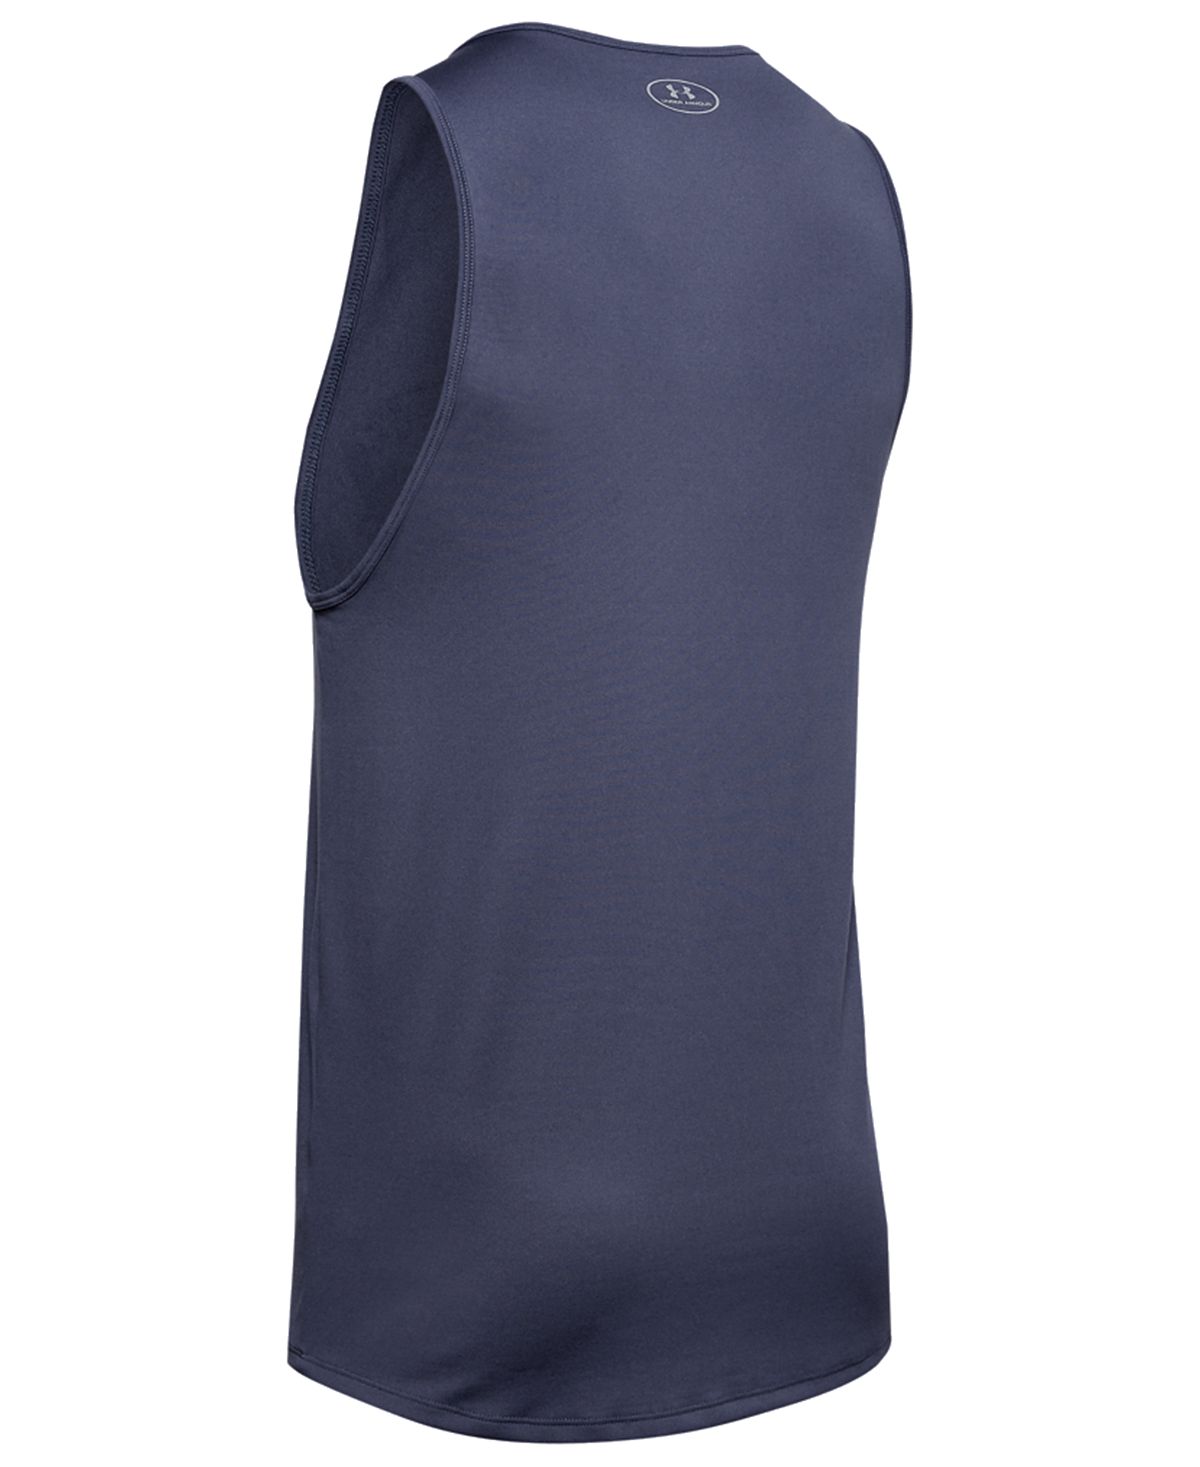 Under Armour Tech™ 2.0 Graphic Tank Blue Ink